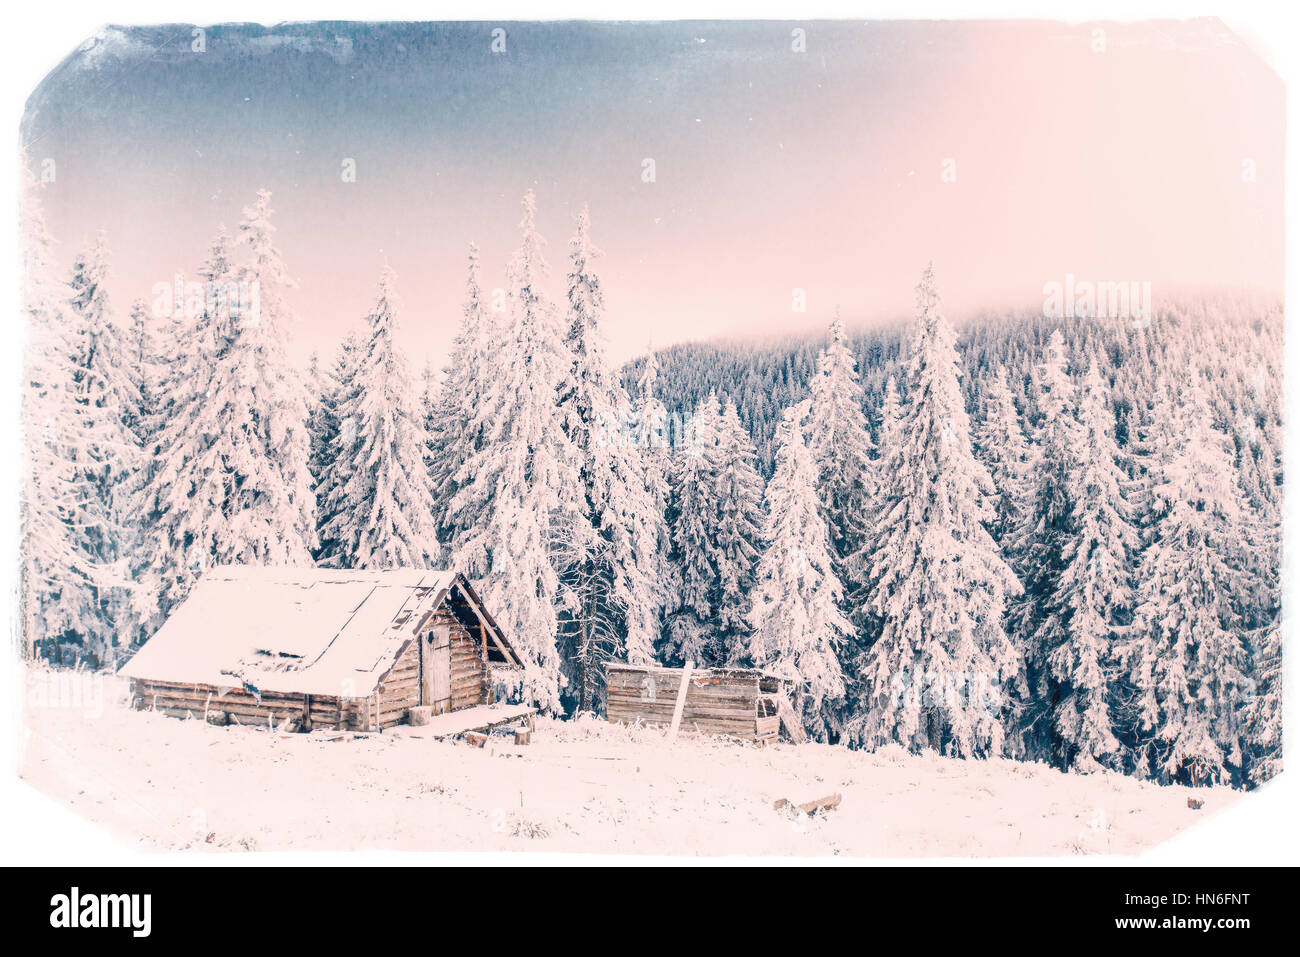 chalet in the mountains. Vintage effect Stock Photo